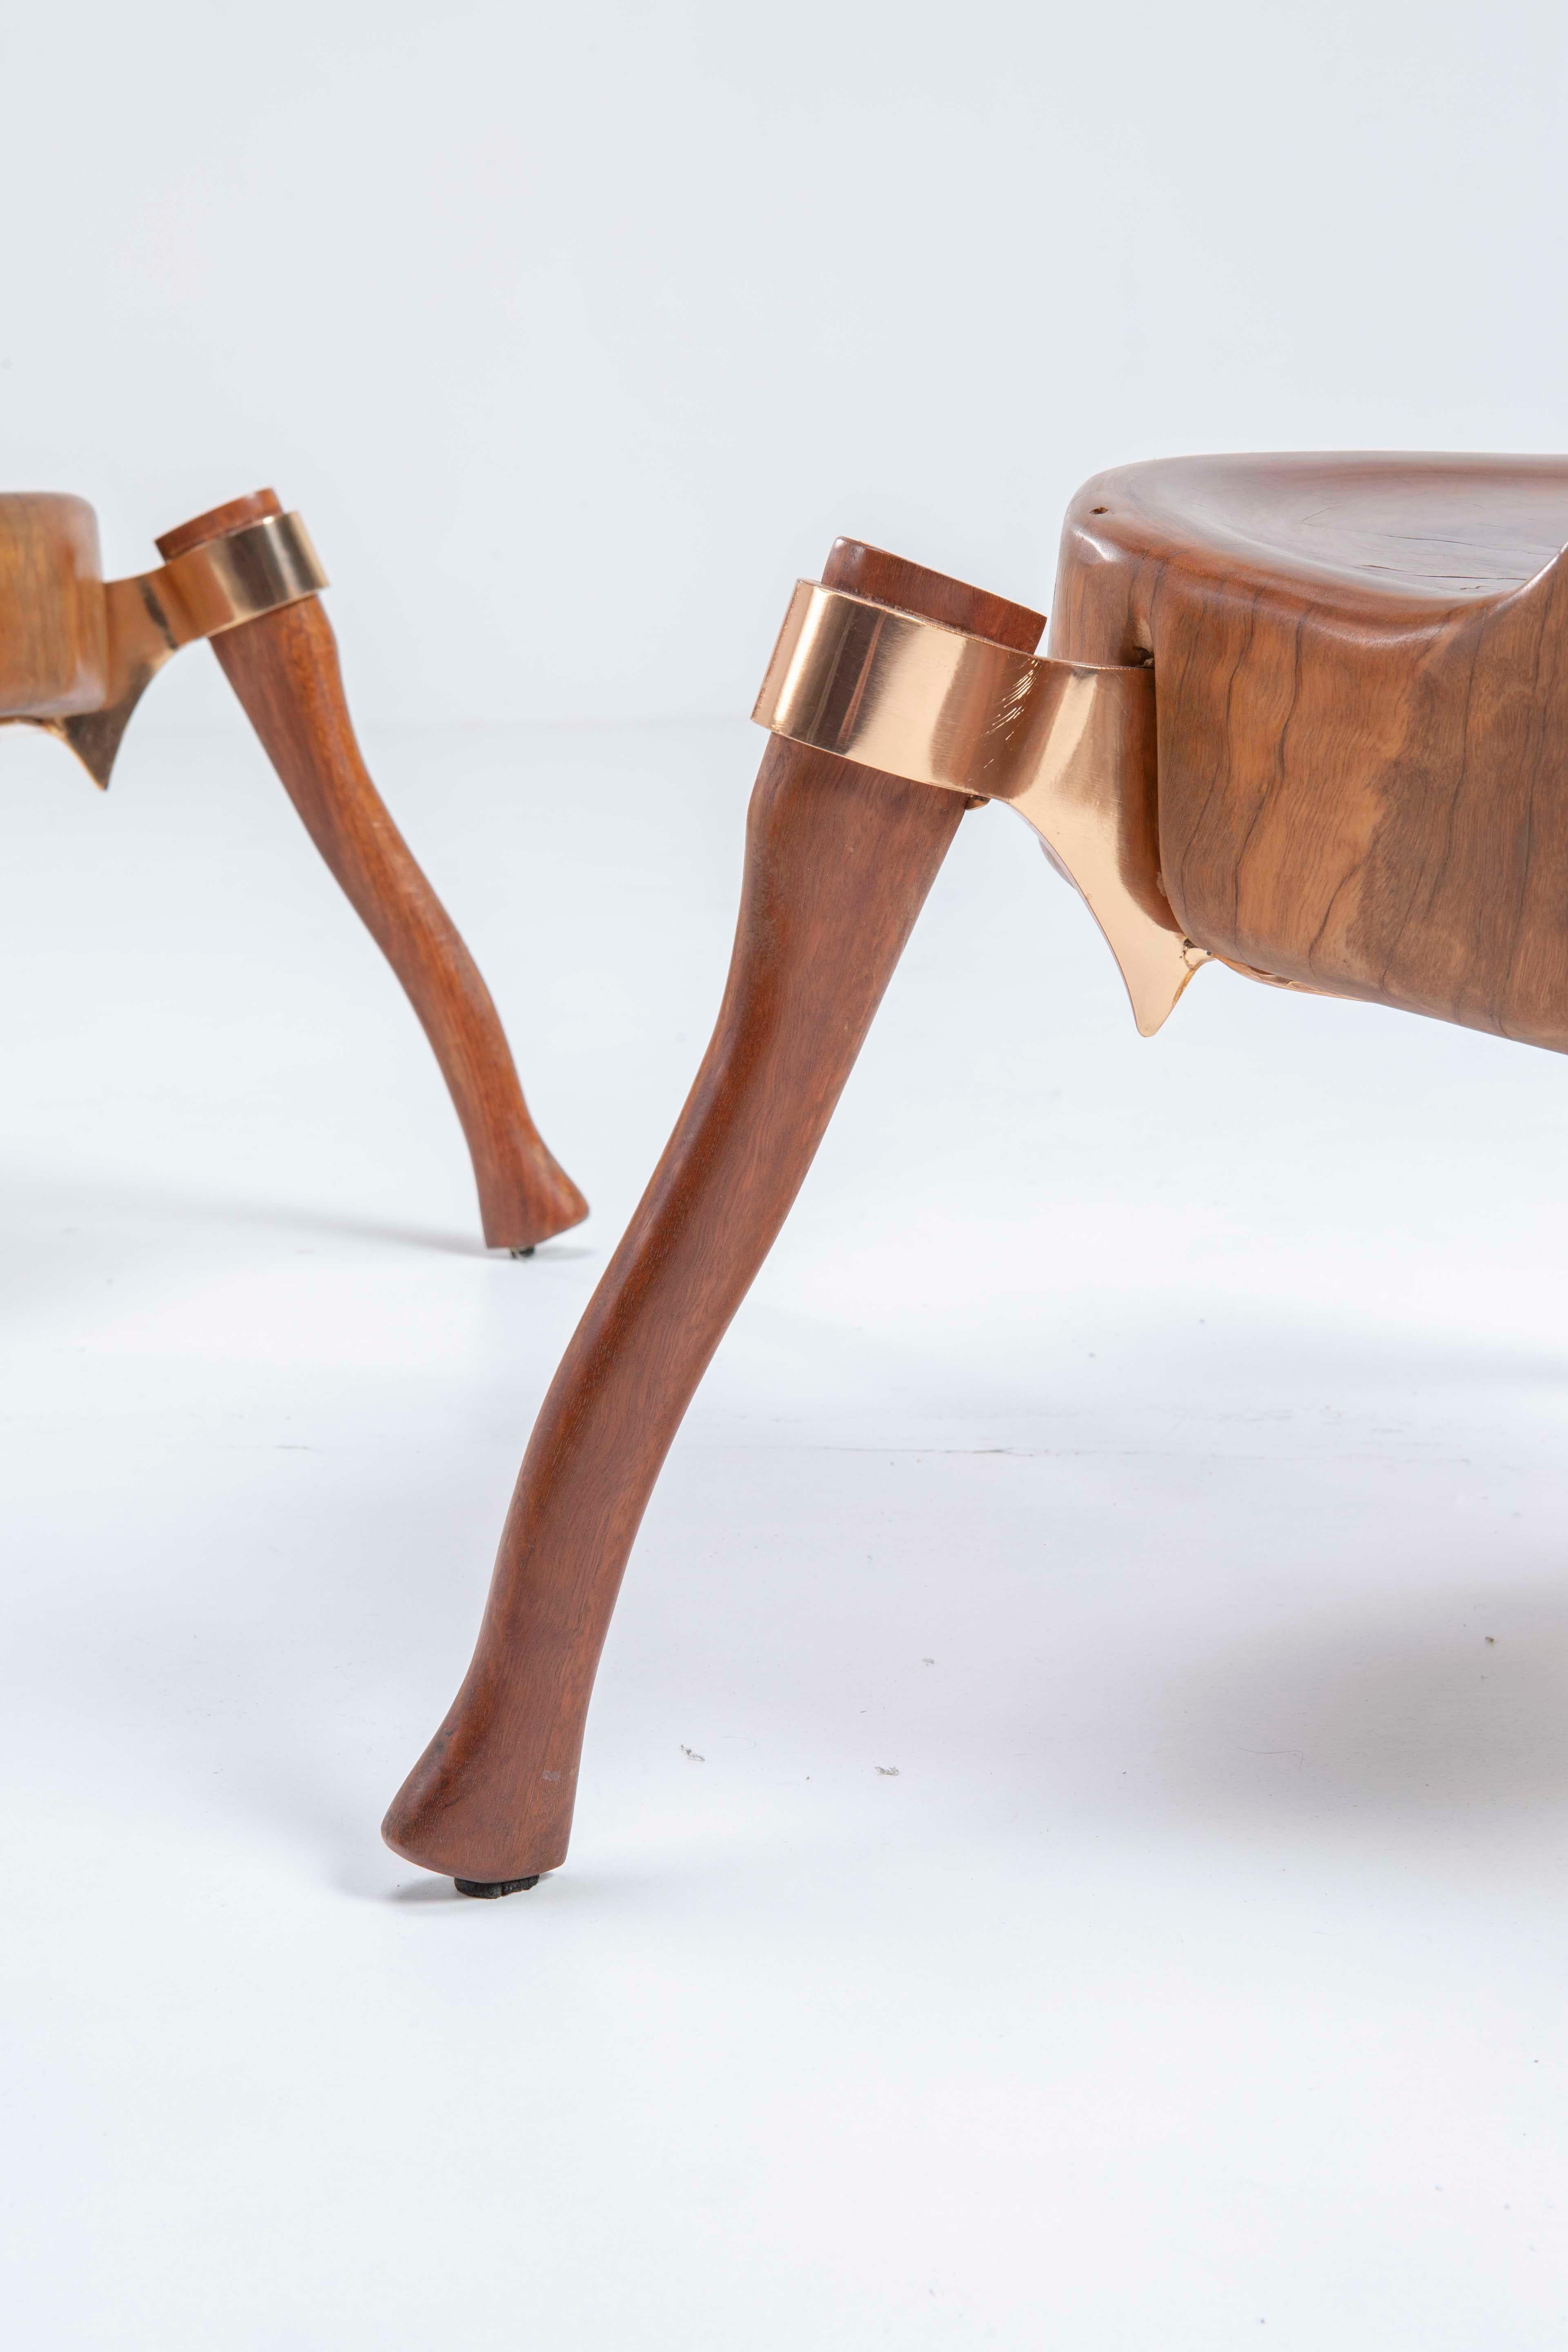 Brass Léo Capote pair of stunning Cadeira Machado stools - Numbered and signed - 2015